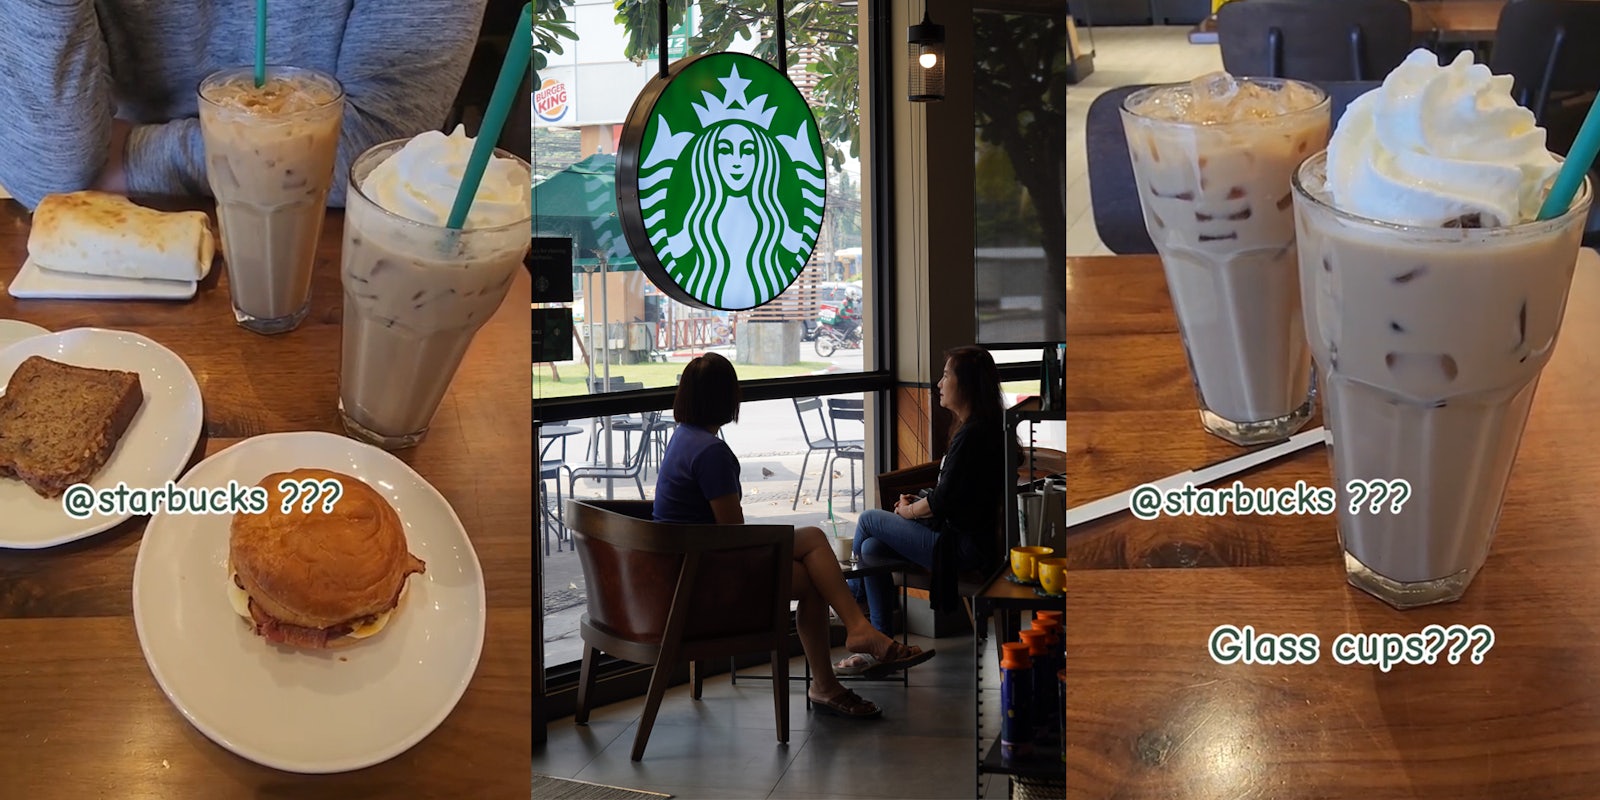 Starbucks customers seated at table with drinks in glass cups with caption '@starbucks???' (l) Starbucks interior with customers seated underneath sign (c) Starbucks drinks on table in glass cups with caption '@starbucks??? Glass cups???' (r)